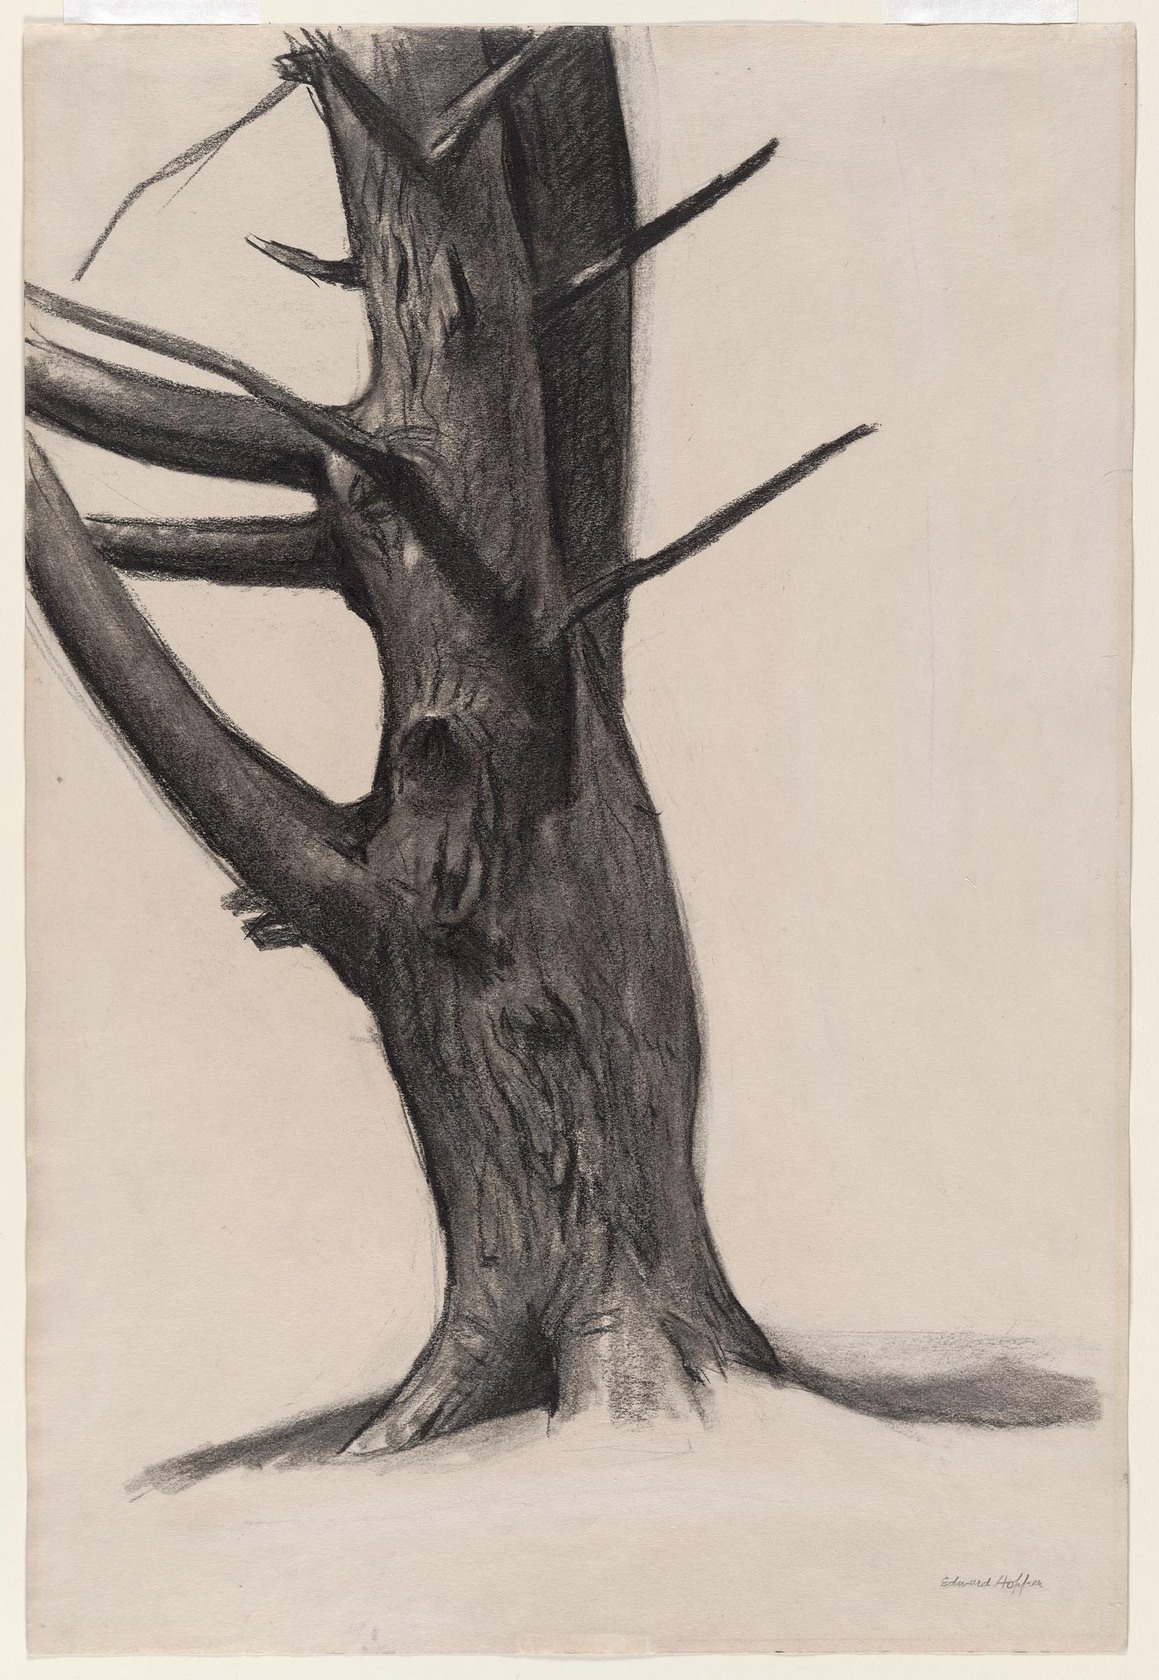 A drawing depicts a tree with no leaves against a plain background. 